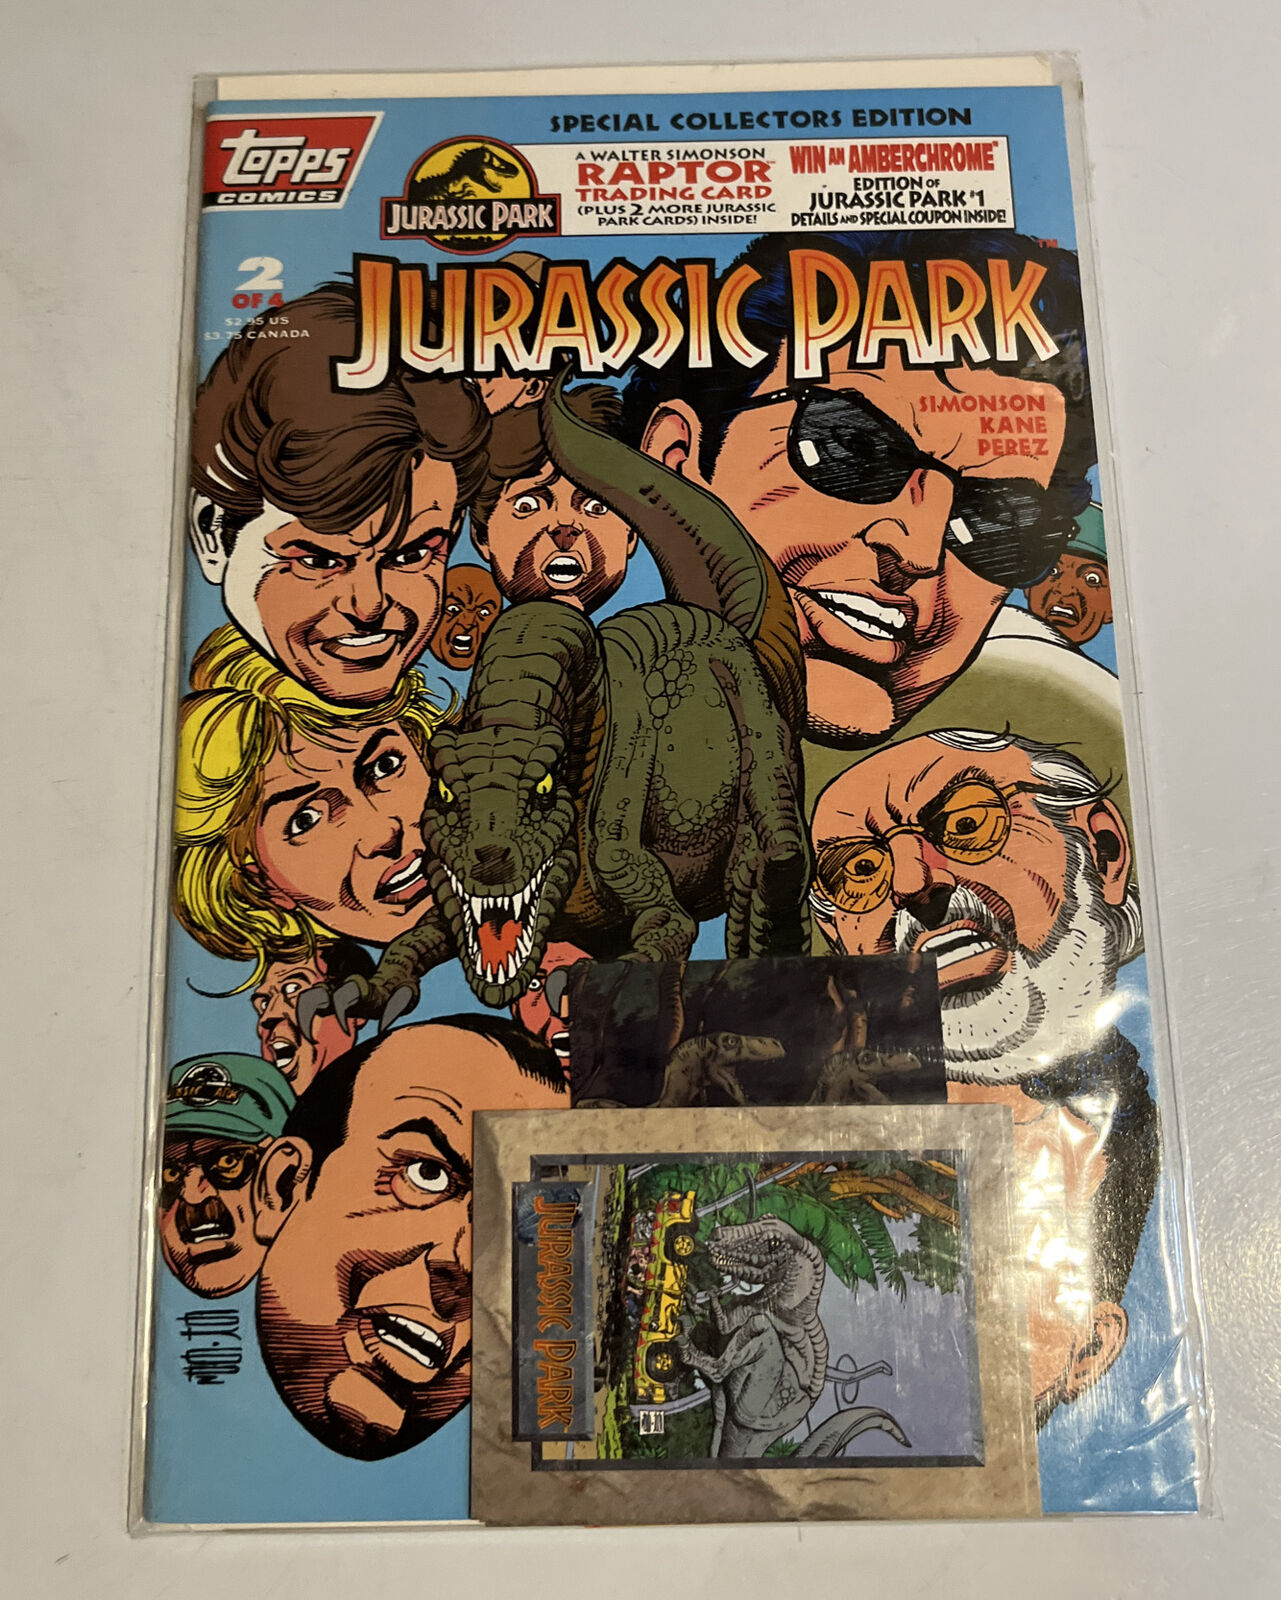 Topps Comics Jurassic Park #2 Of 4 Sealed Polybag